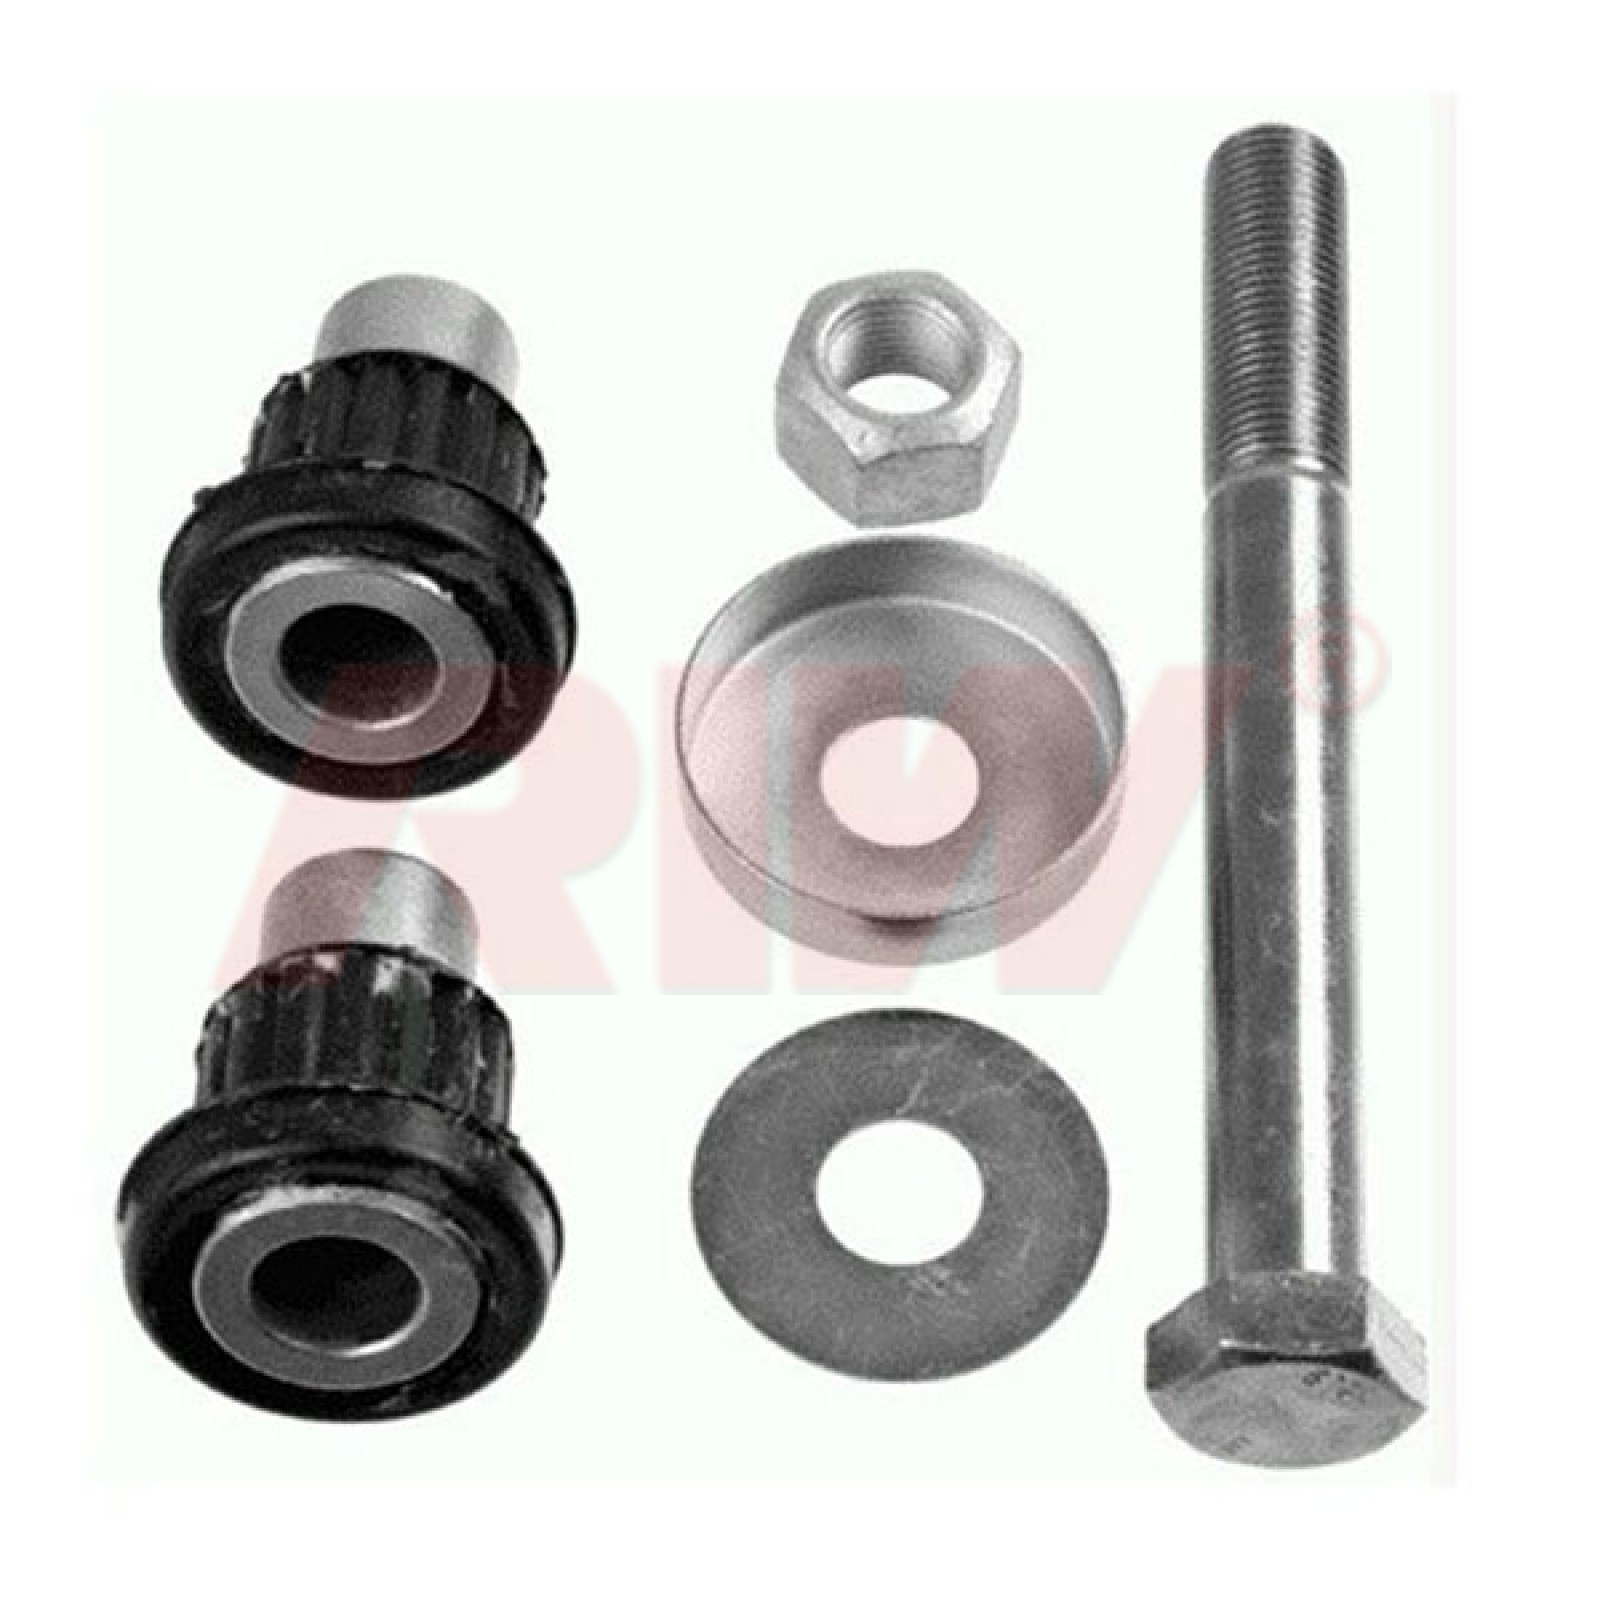 MERCEDES S CLASS (W126) 1979 - 1991 Axle Support Bushing